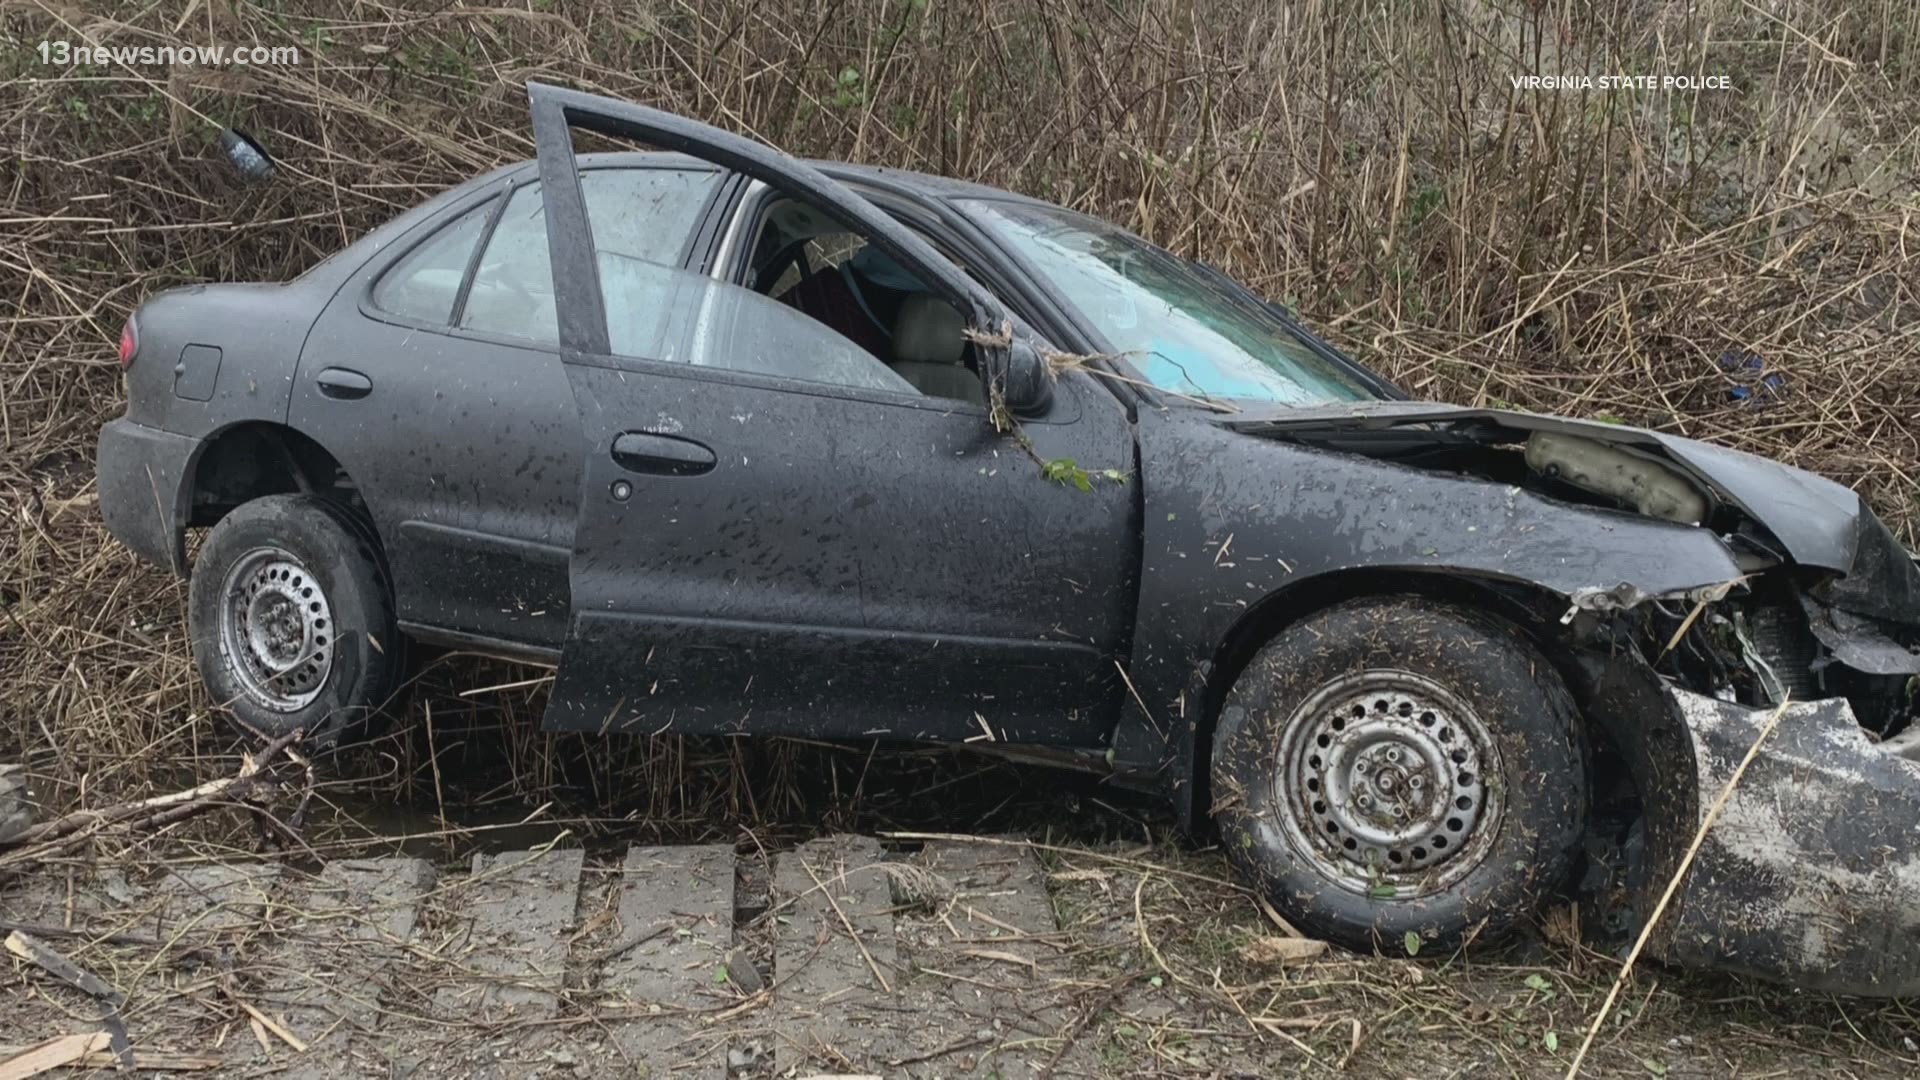 Virginia State Police troopers were trying to pull over a girl for speeding and vehicle registration. She was taken into custody after the crash.